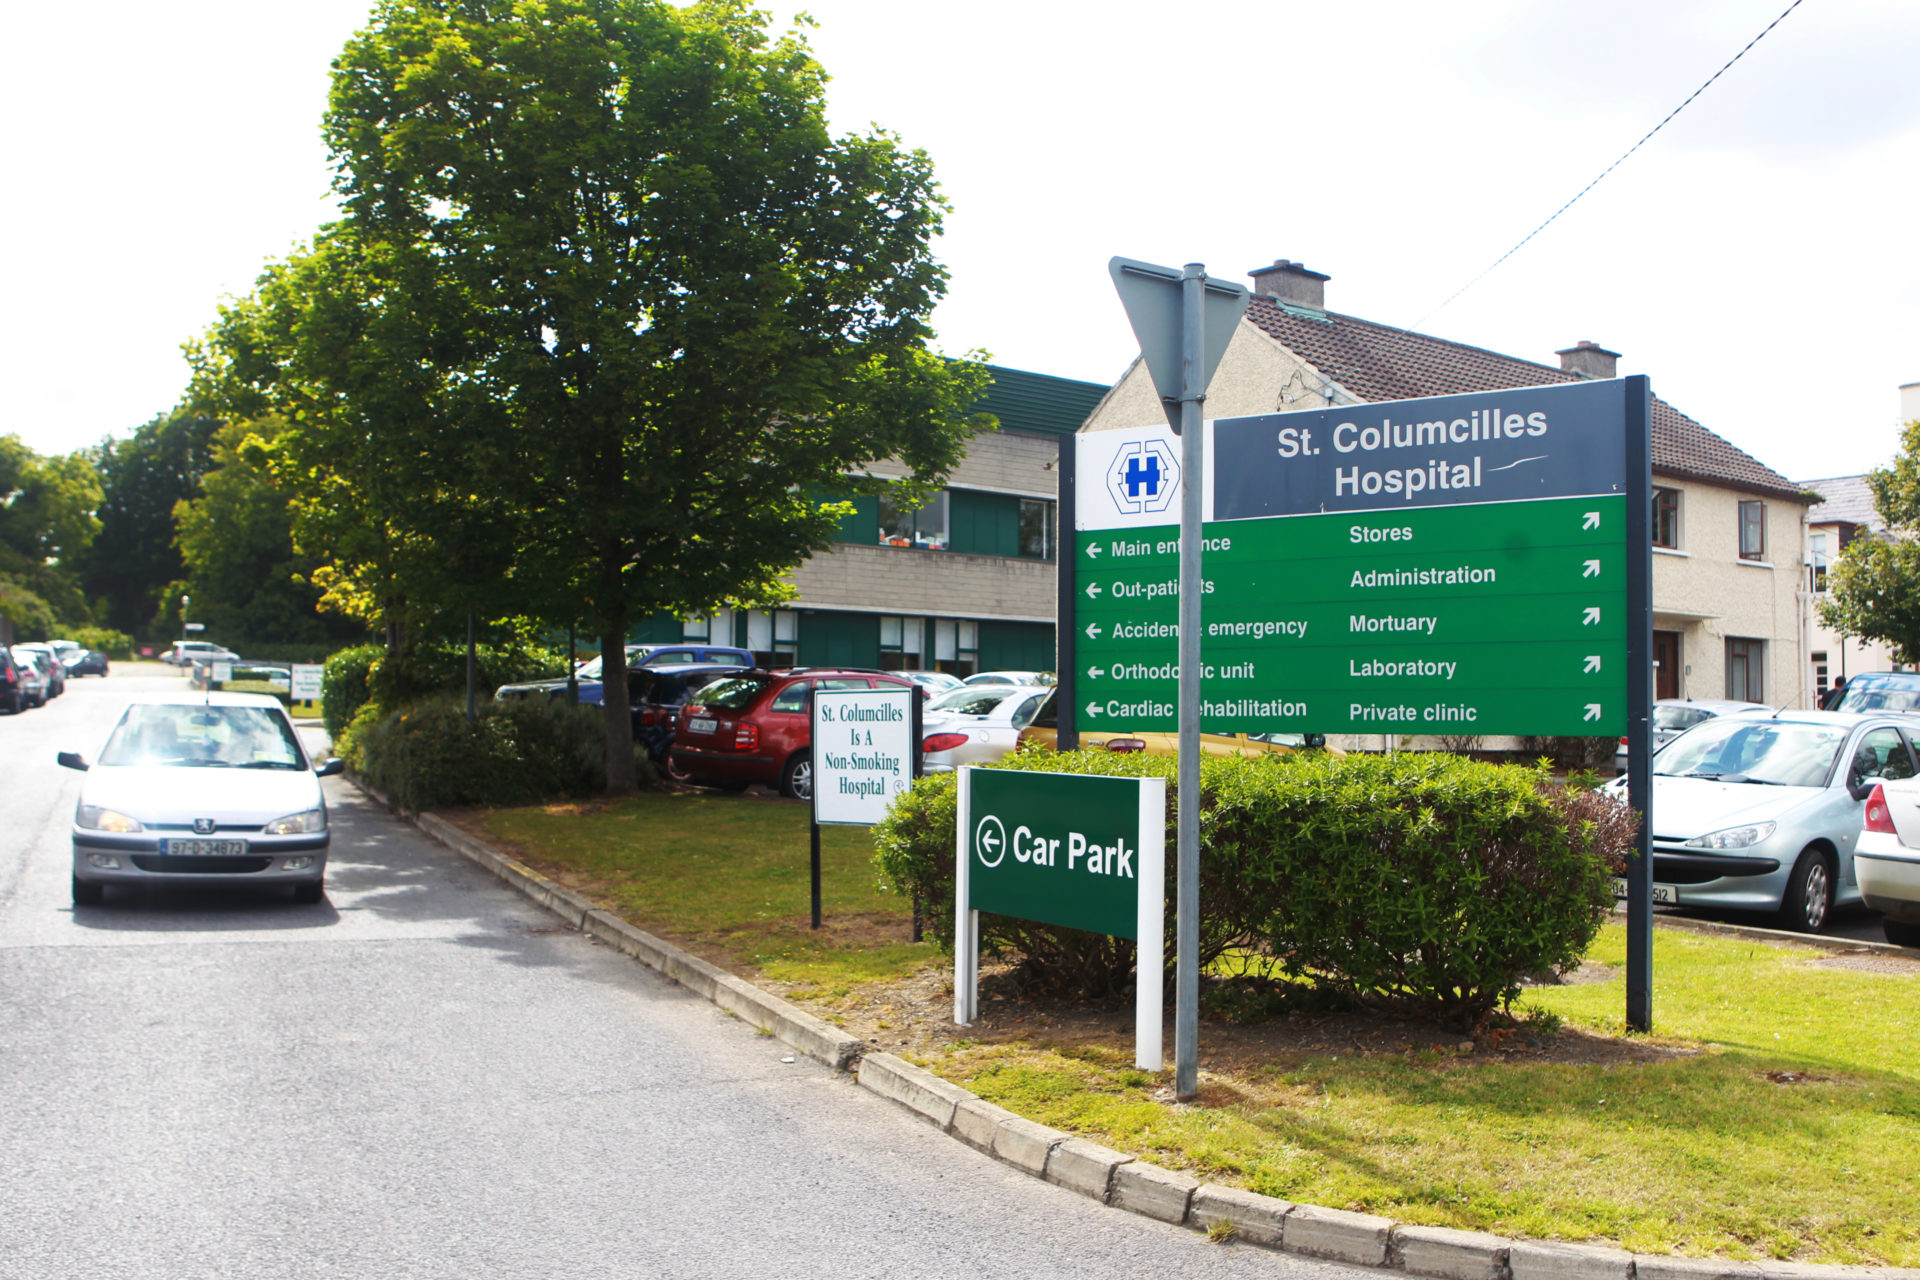 St Columcille's Hospital, Loughlinstown, where the National Gender Service is based. Photo: Leon Farrell/Photocall Ireland.